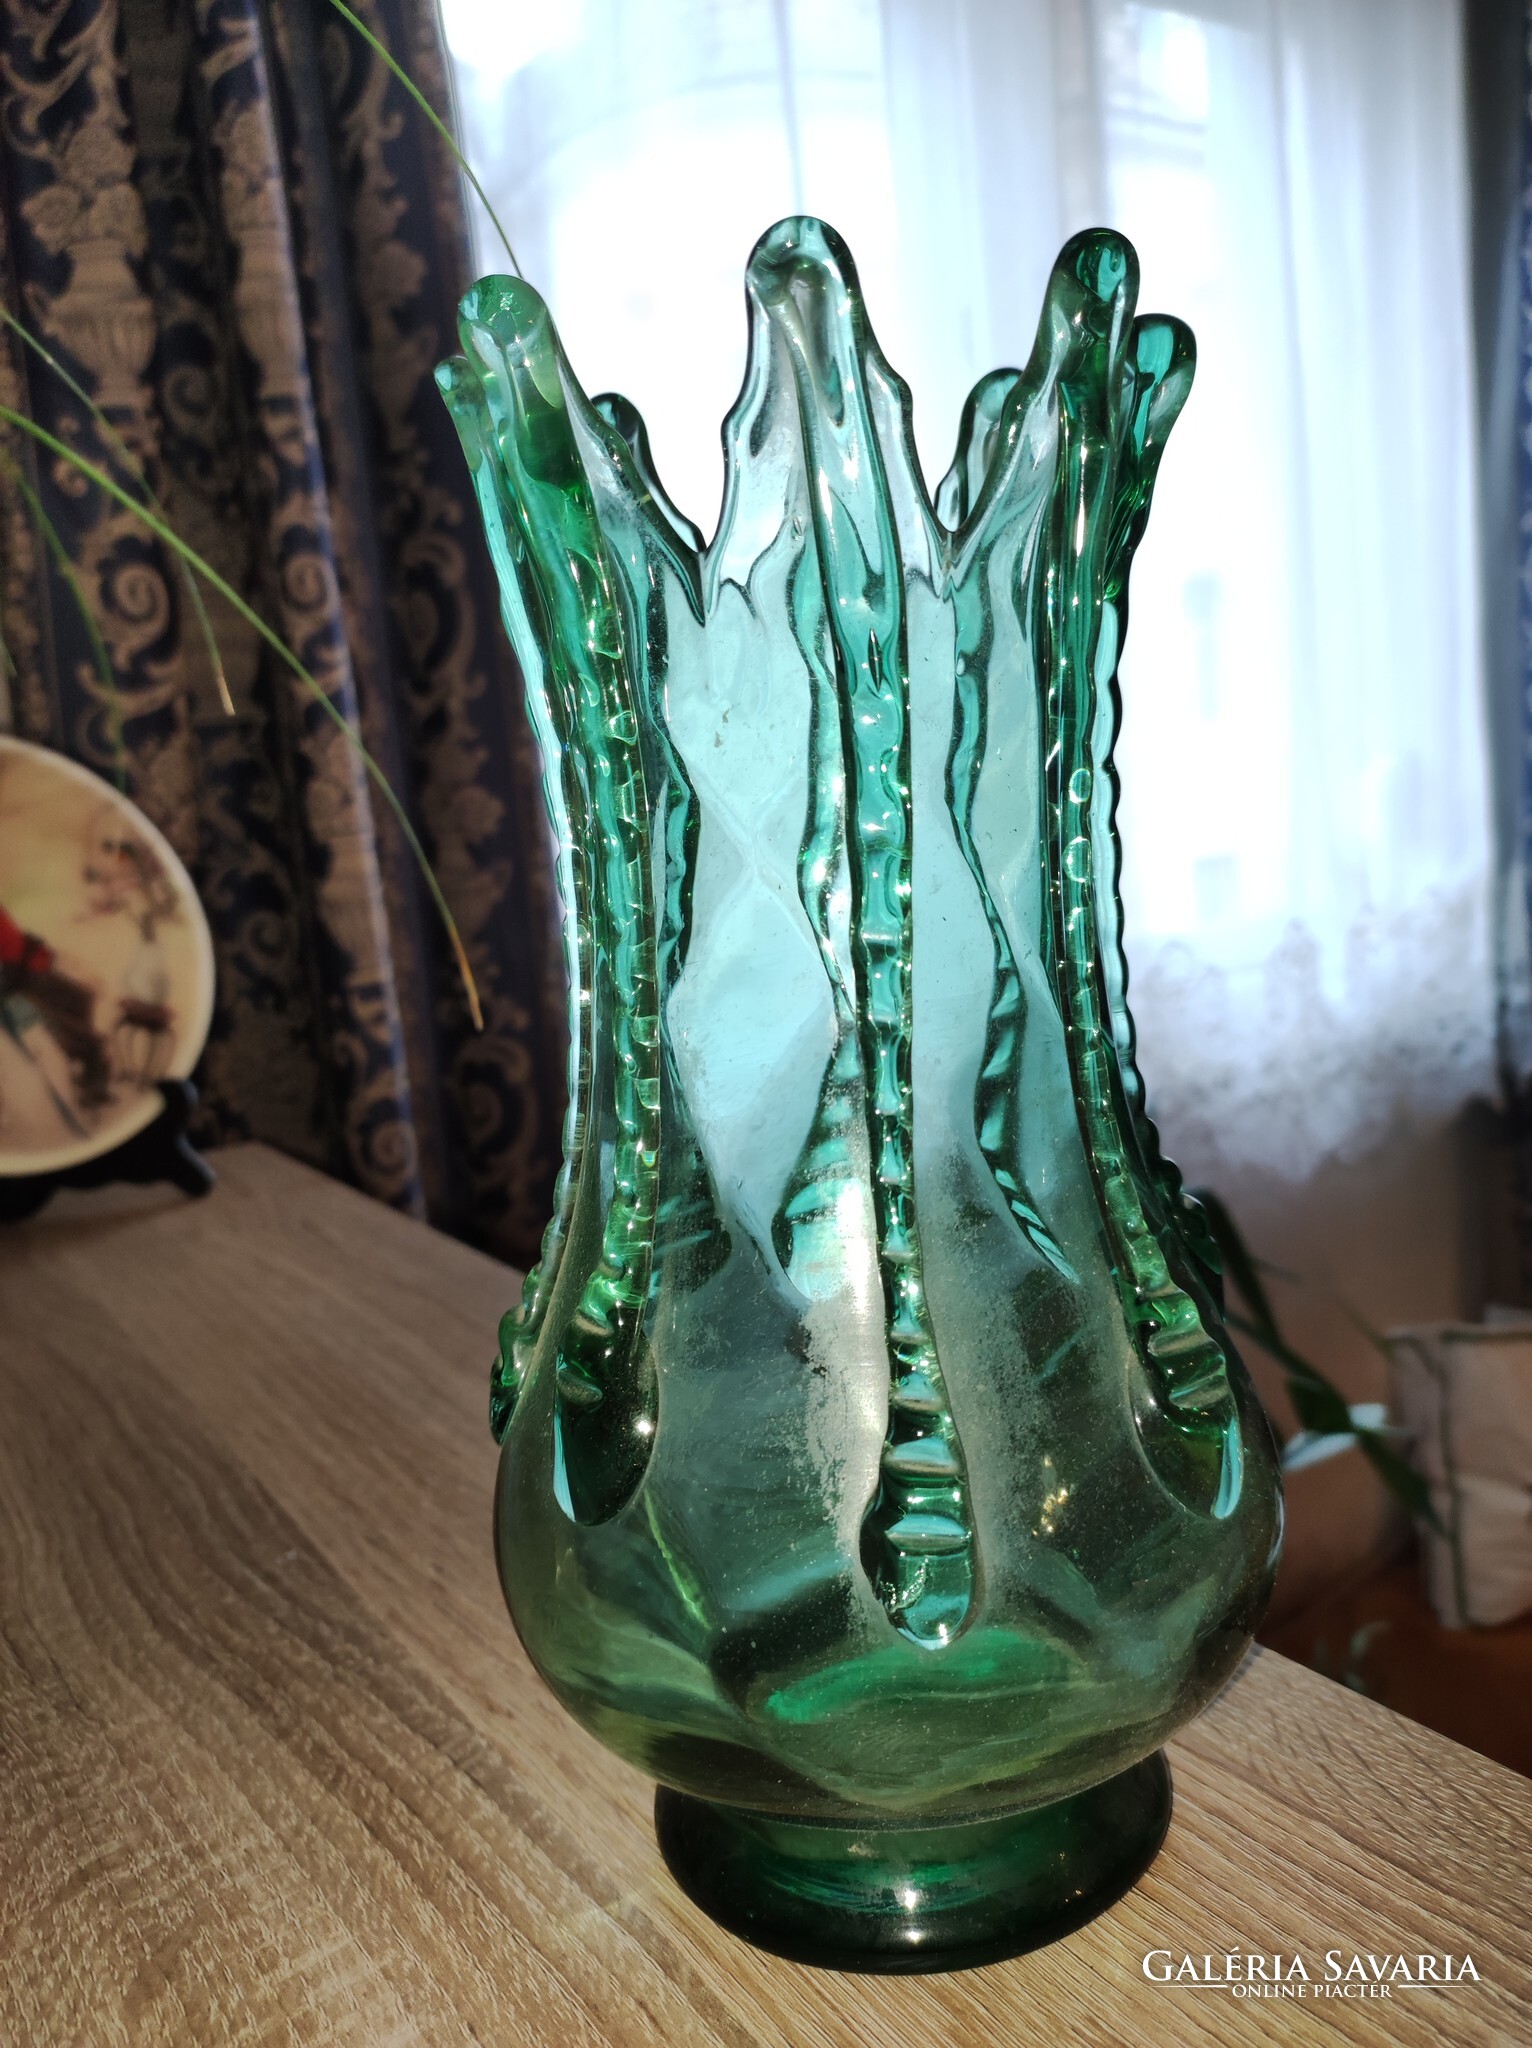 Turquoise glass vase with 8 horns (24 cm) - Glass  Galeria Savaria  online marketplace - Buy or sell on a reliable, quality online platform!